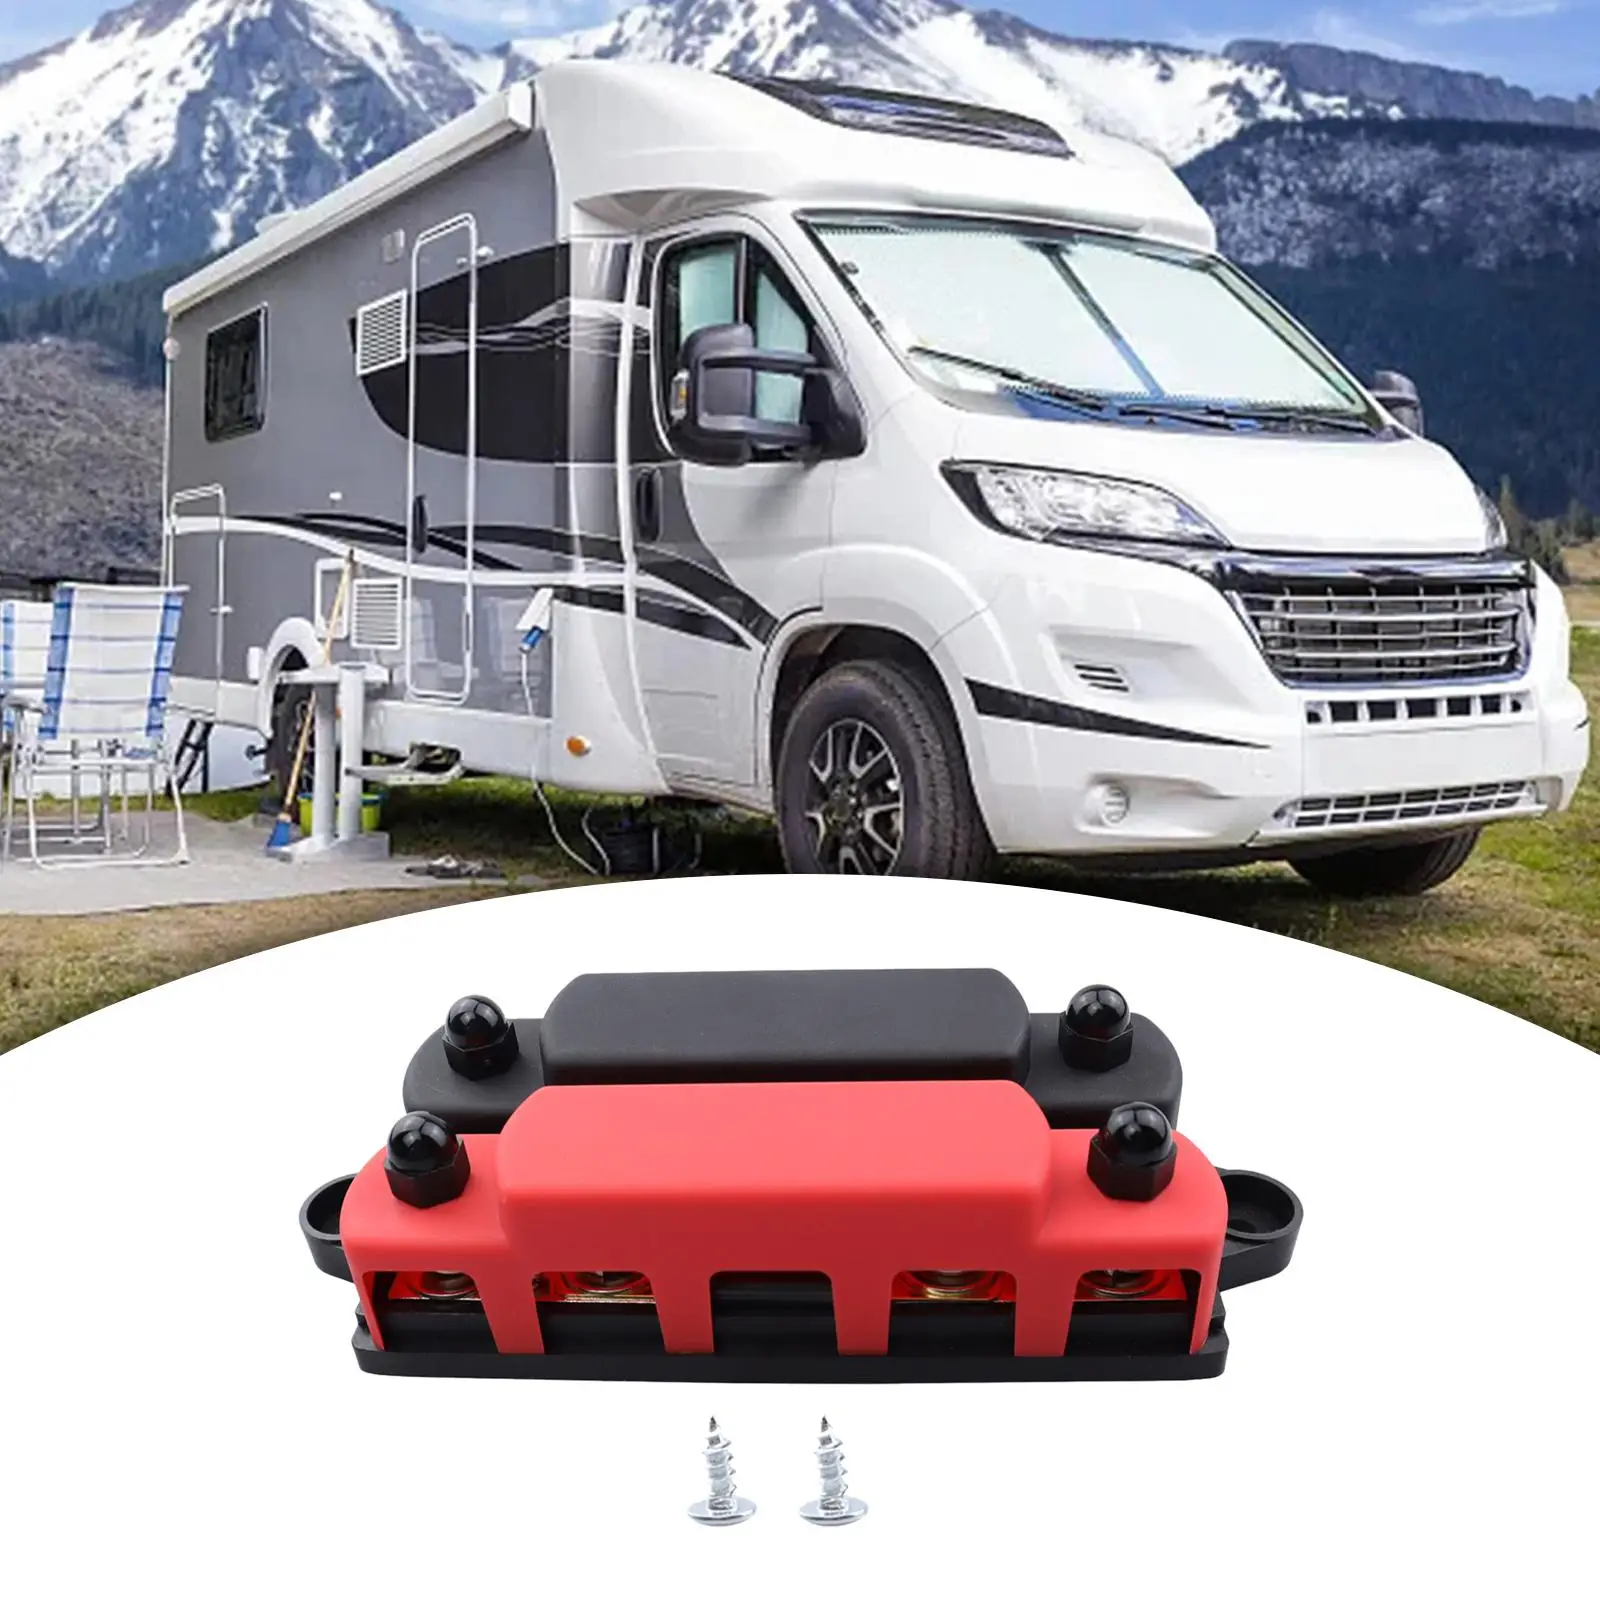 4 Way Power Distribution Bus Bar Terminal with Cover for Marine RV